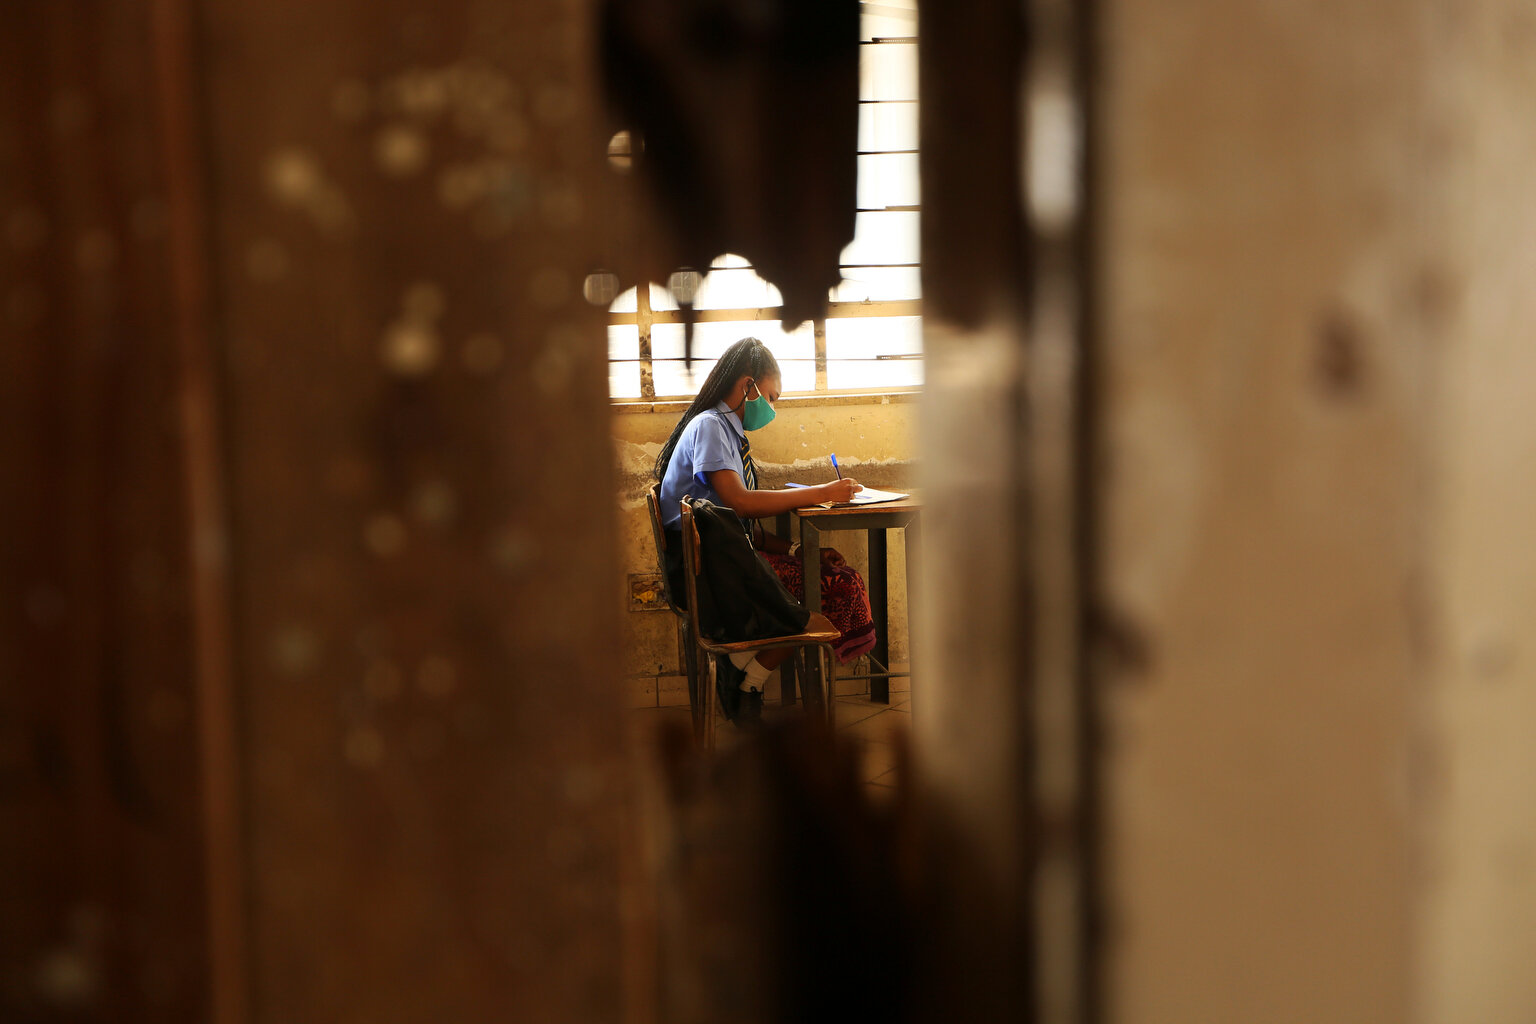  A student takes notes inside a classroom at a school in Harare, Monday, Sept, 28, 2020. Zimbabwe schools have reopened in phases, but with smaller number of pupils,more teachers and other related measures to enable children to resume their education